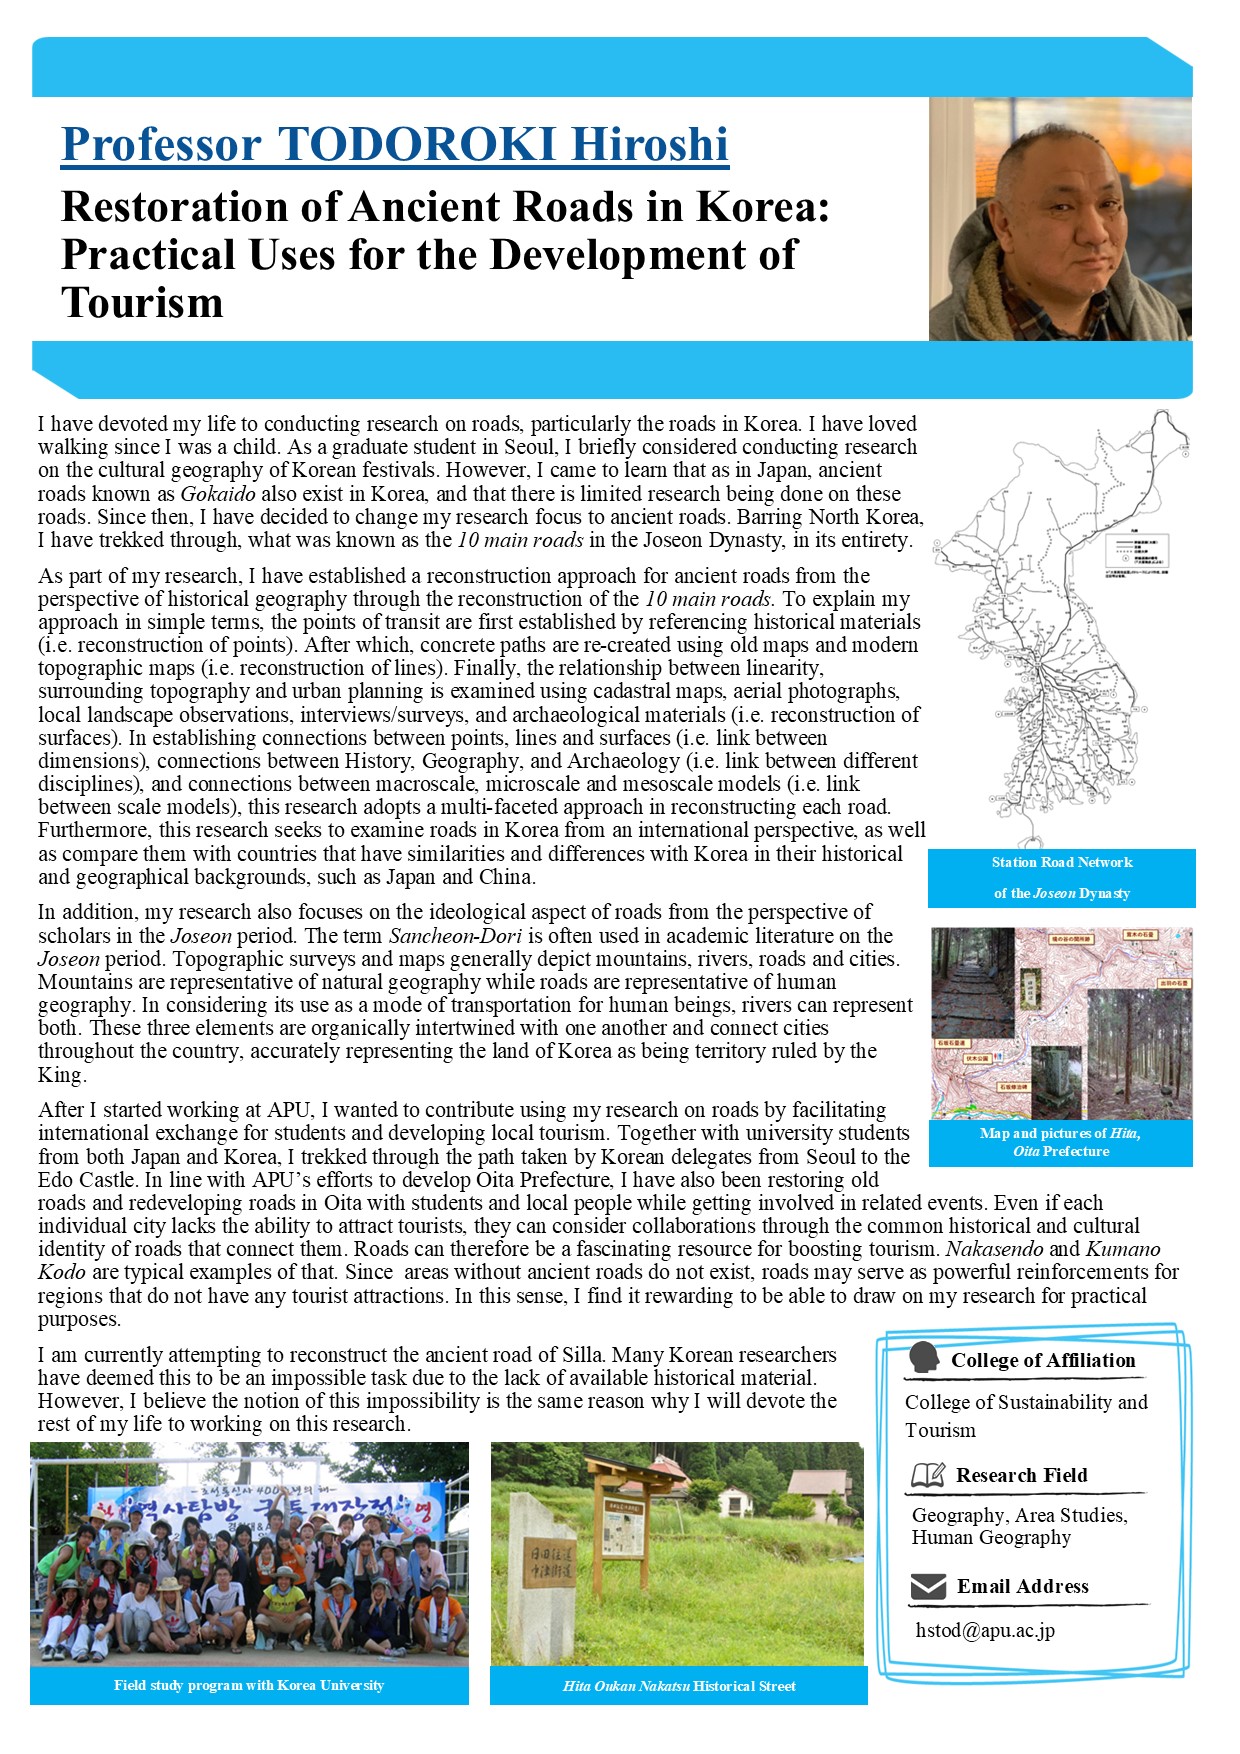 Restoration of Ancient Roads in Korea: Practical Uses for the Development of Tourism